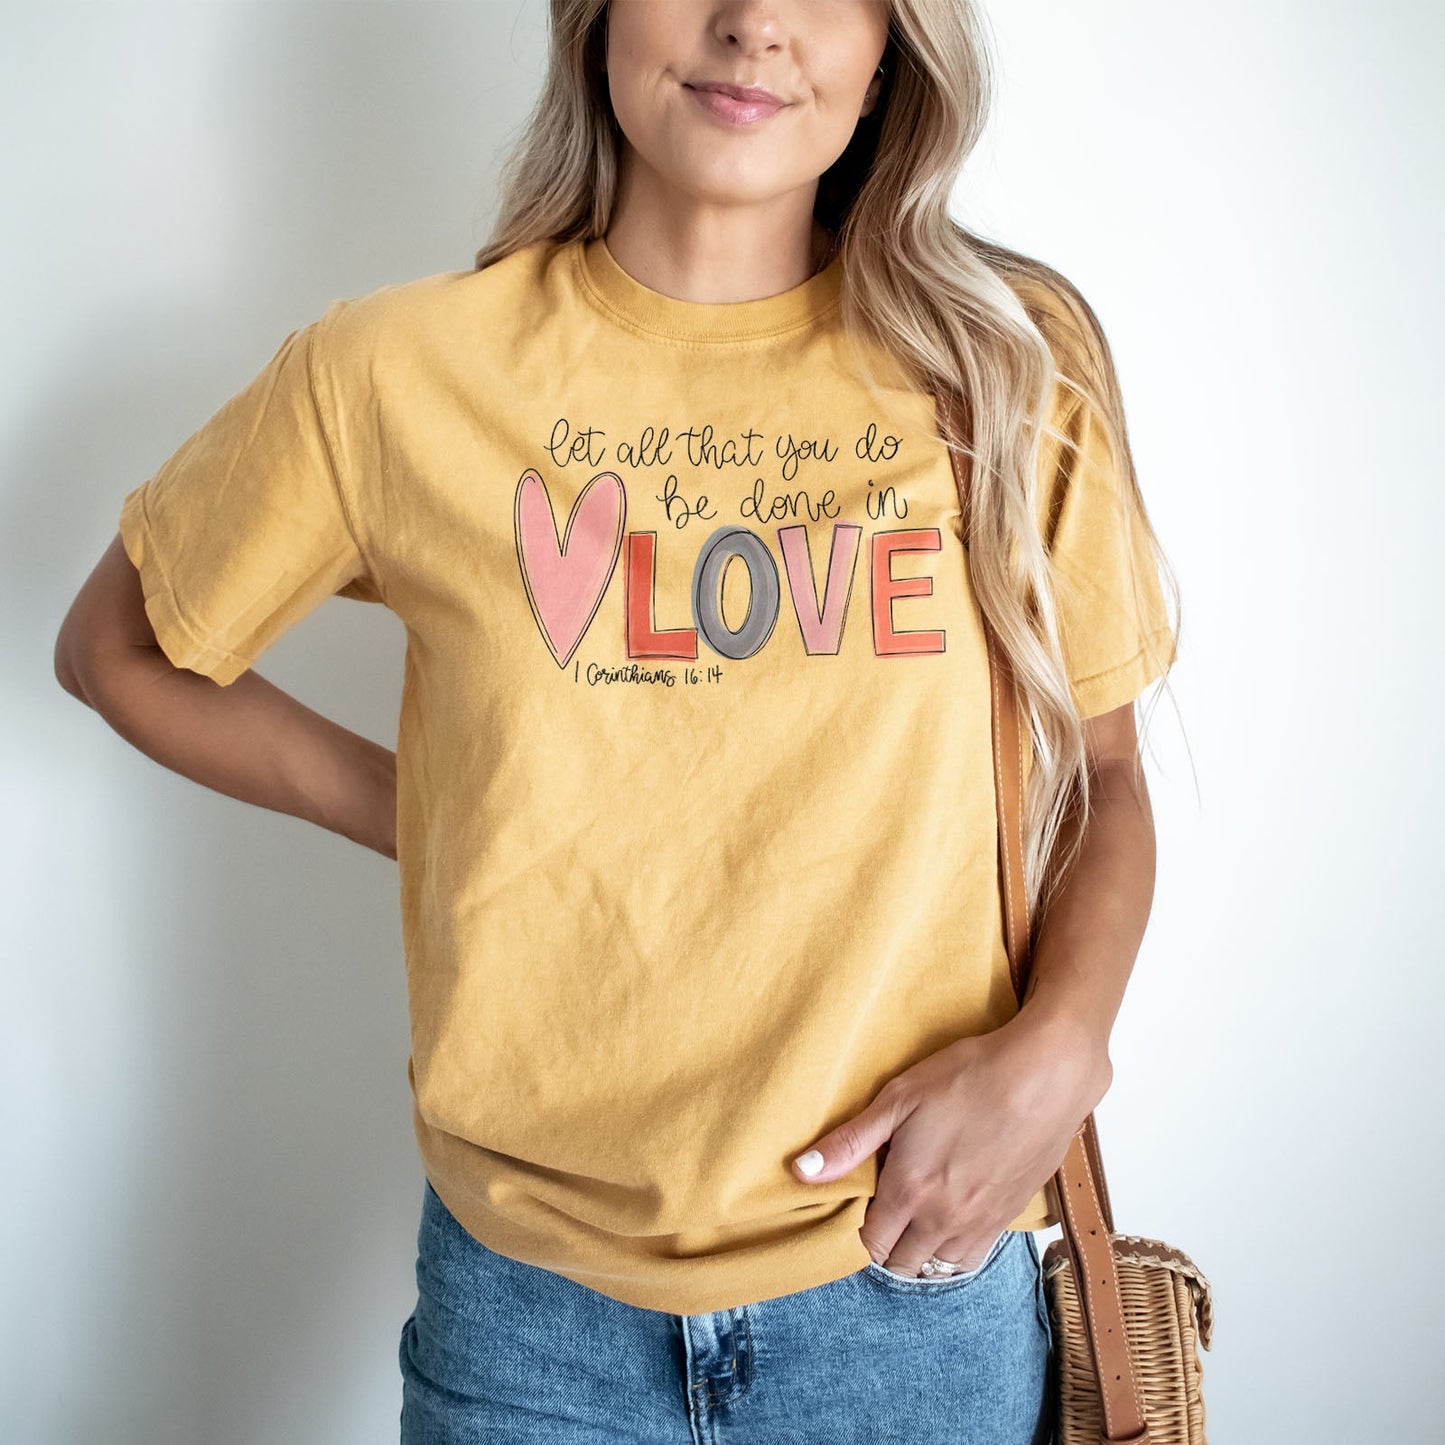 Pastel Be Done In Love Corinthians 16:14 Tee Shirts For Women - Christian Shirts for Women - Religious Tee Shirts